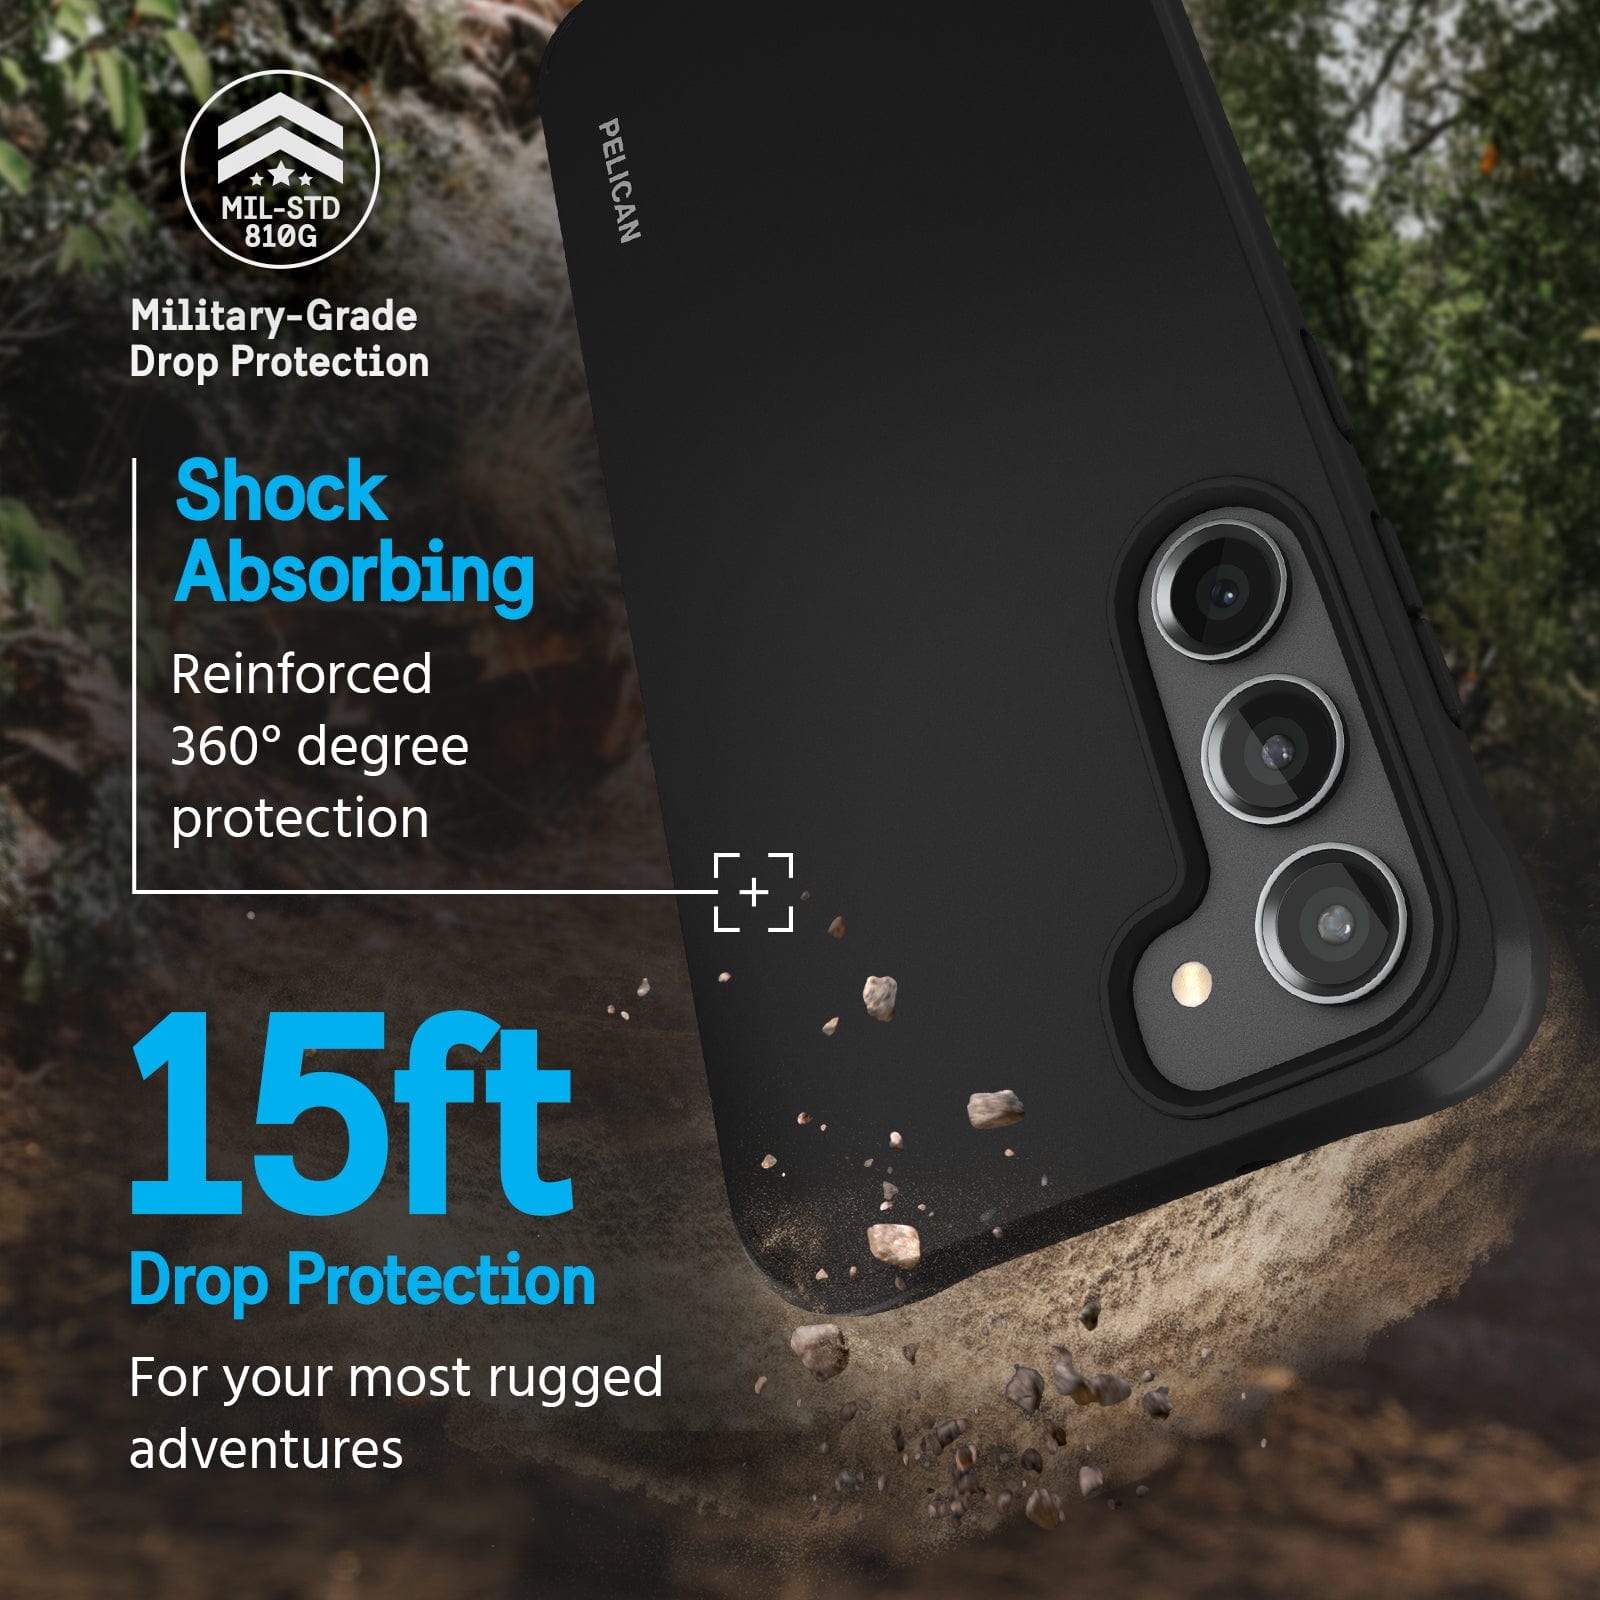 MILITARY GRADE DROP PROTECTION. SHOCK ABSORBING REINFORCED 360 DEGREE PROTECTION. 15FT DROP PROTECTION FOR YOUR MOST RUGGED ADVENTURES. 